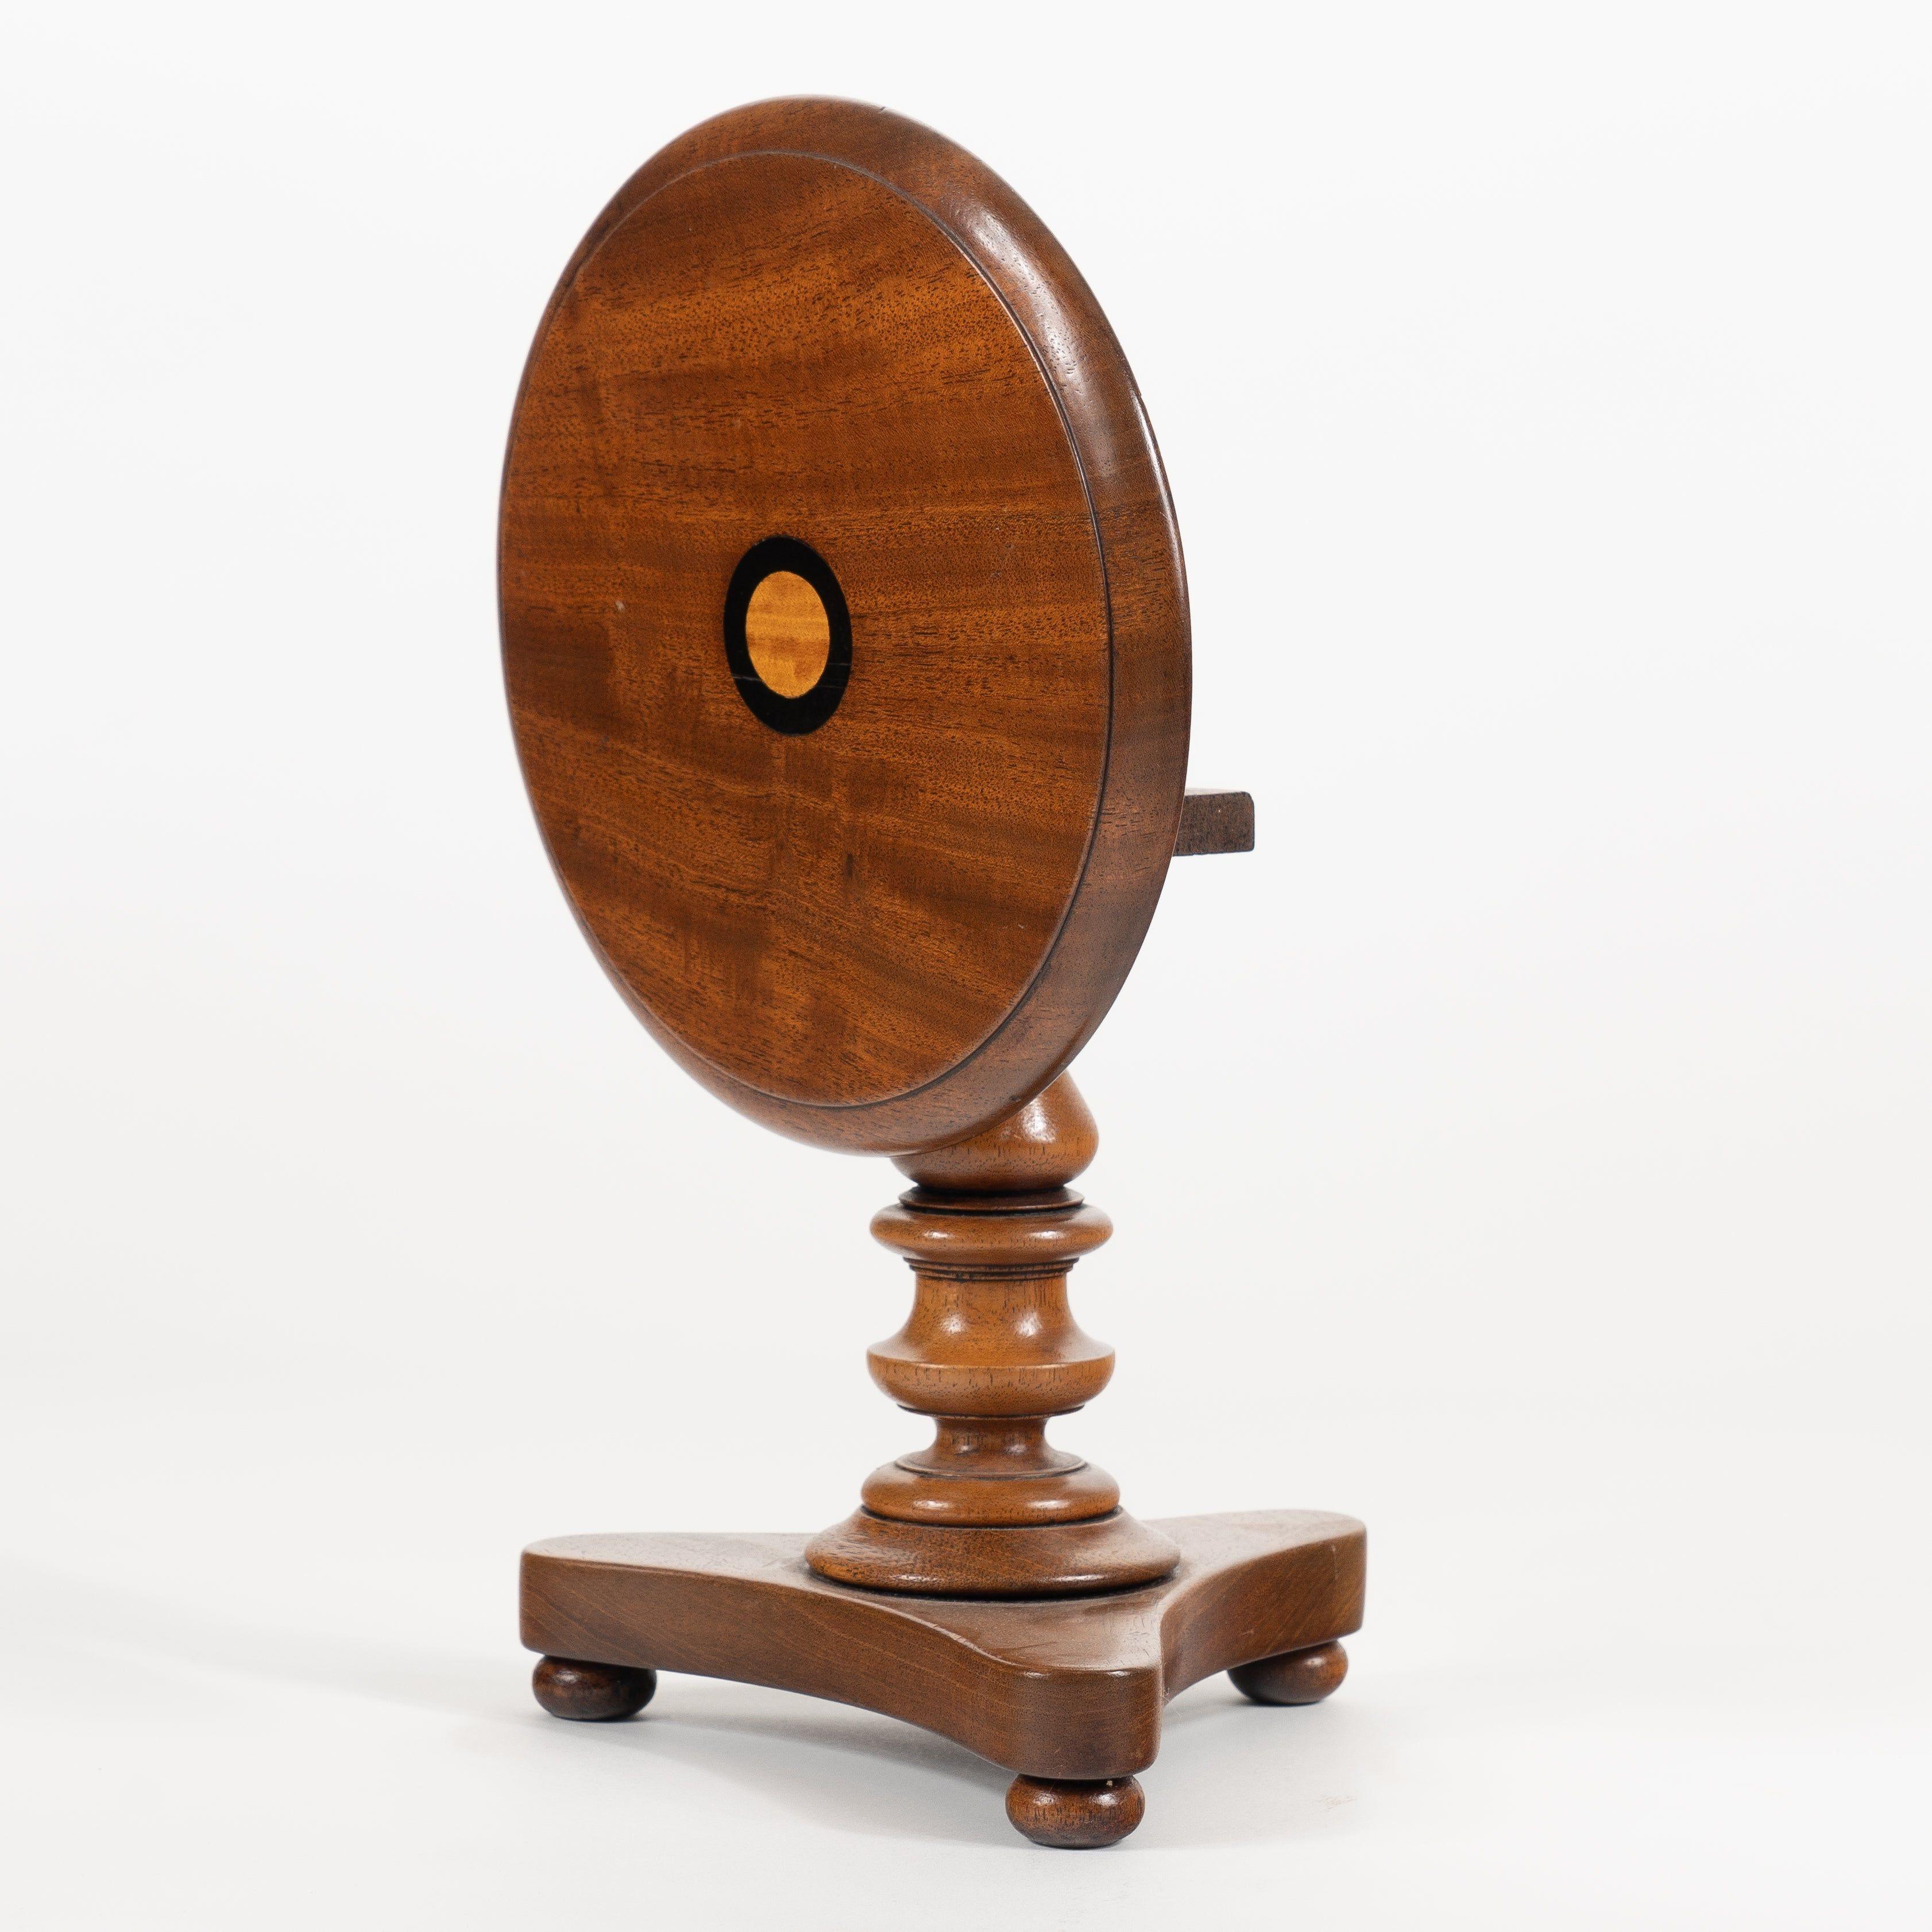 Miniature mahogany Classic Revival tilt top circular pedestal table or candle stand.
Attributed to Thomas Clowney, Mineral Point, Wisconsin.

America, circa 1840.

Materials: Mahogany
Dimensions: 8” W x 8